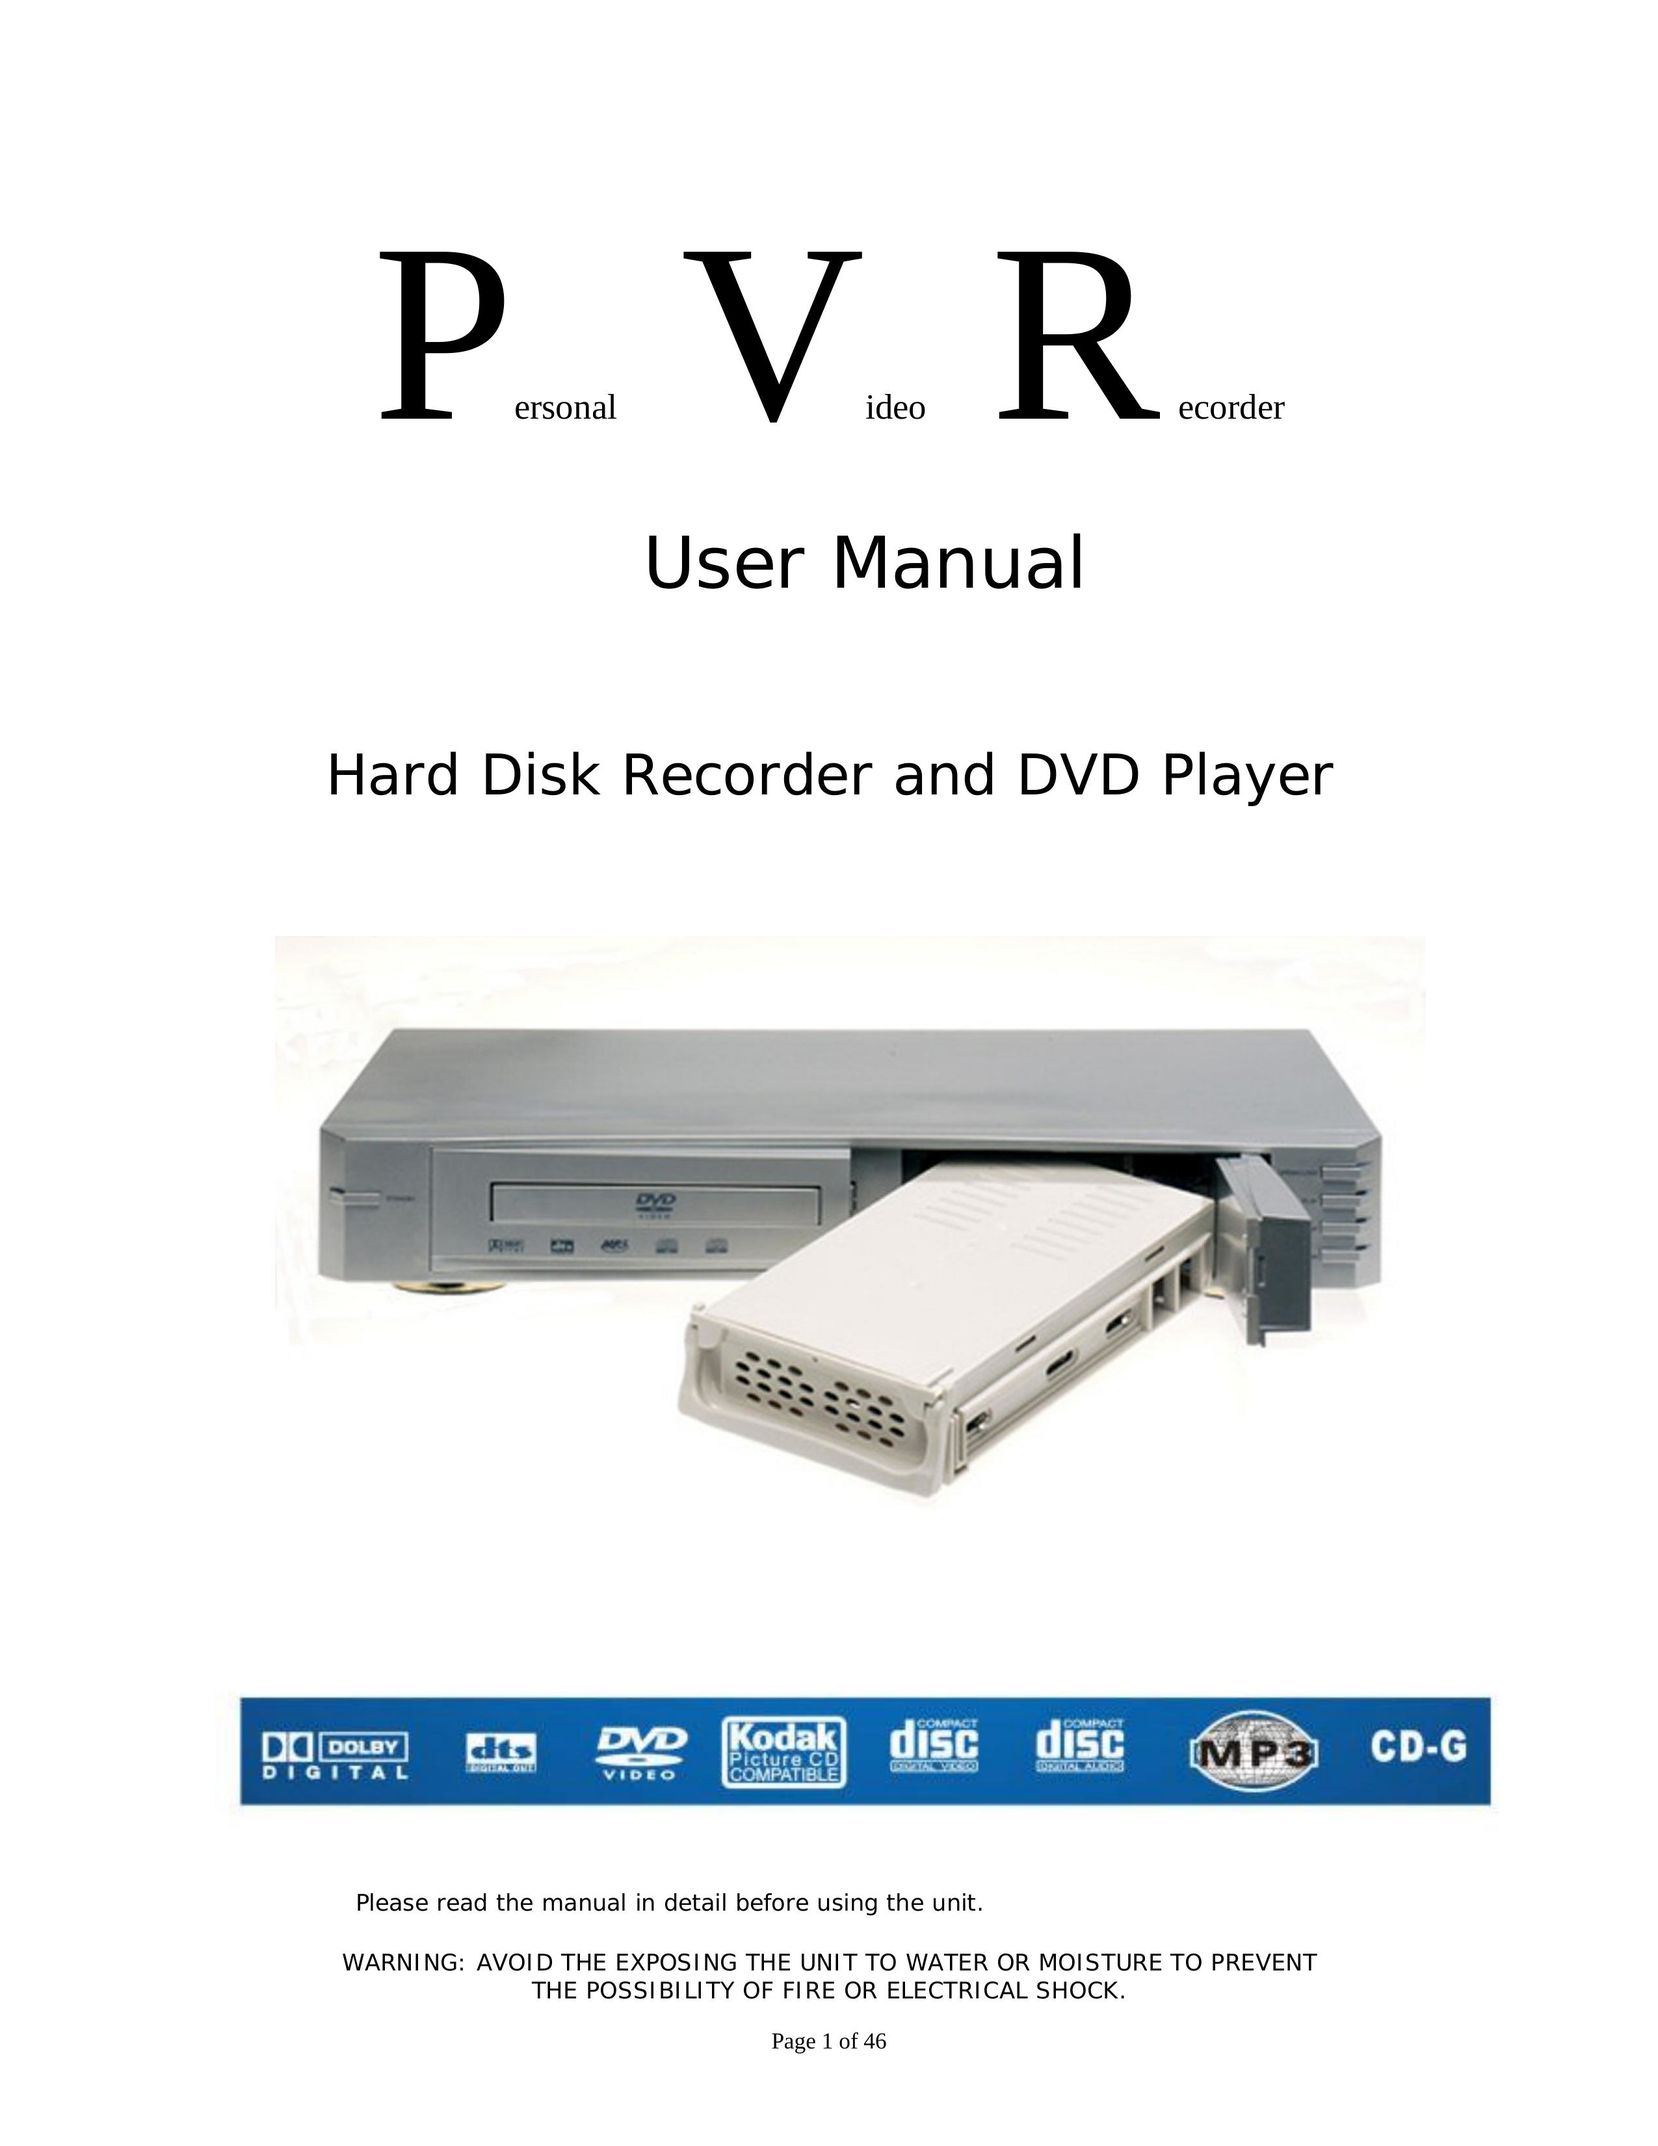 Dolby Laboratories Personal Video Recorder DVD Recorder User Manual (Page 1)